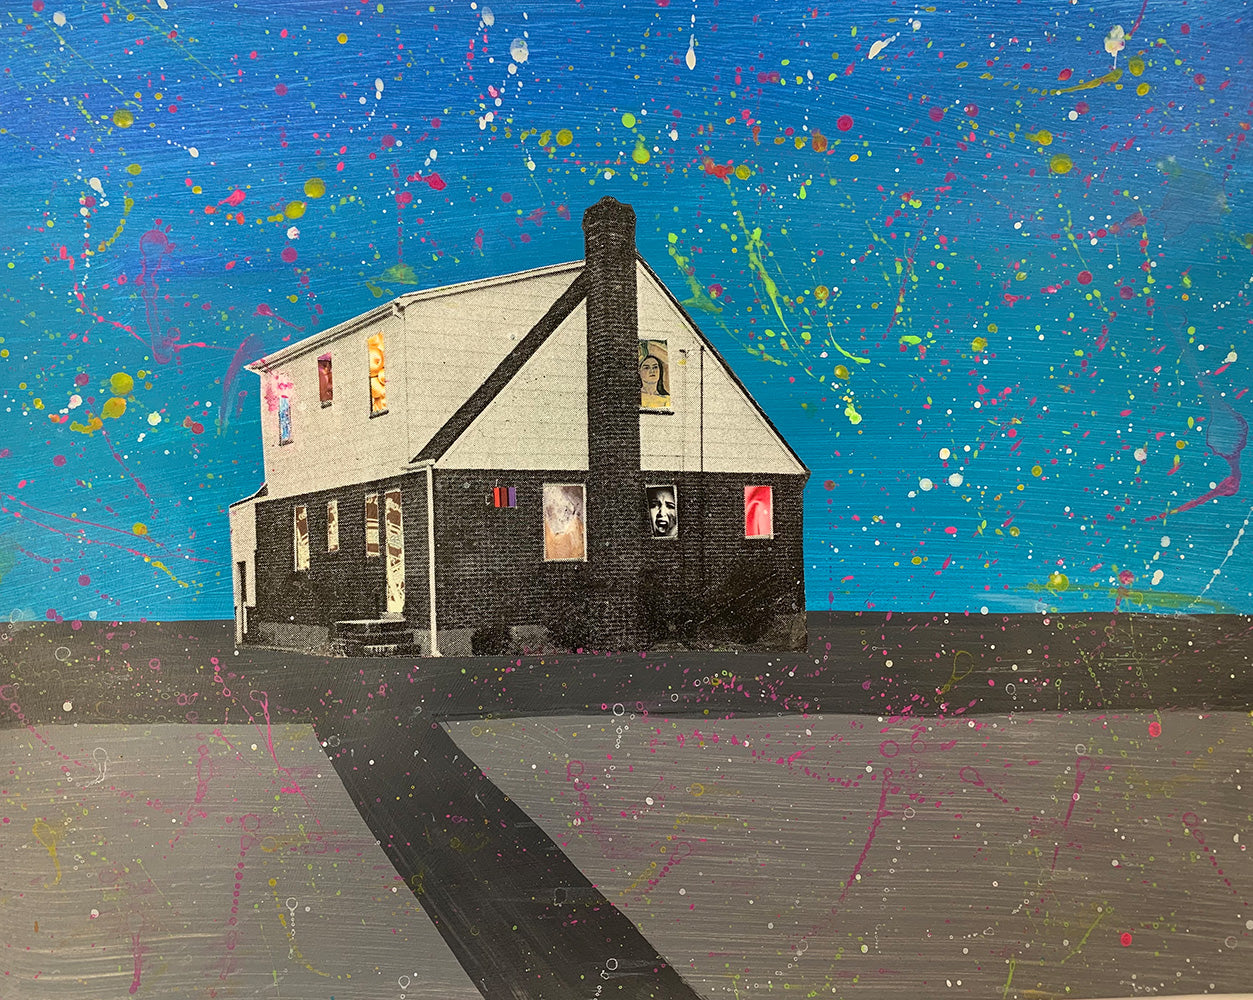 Robin Tewes "House Project 317"